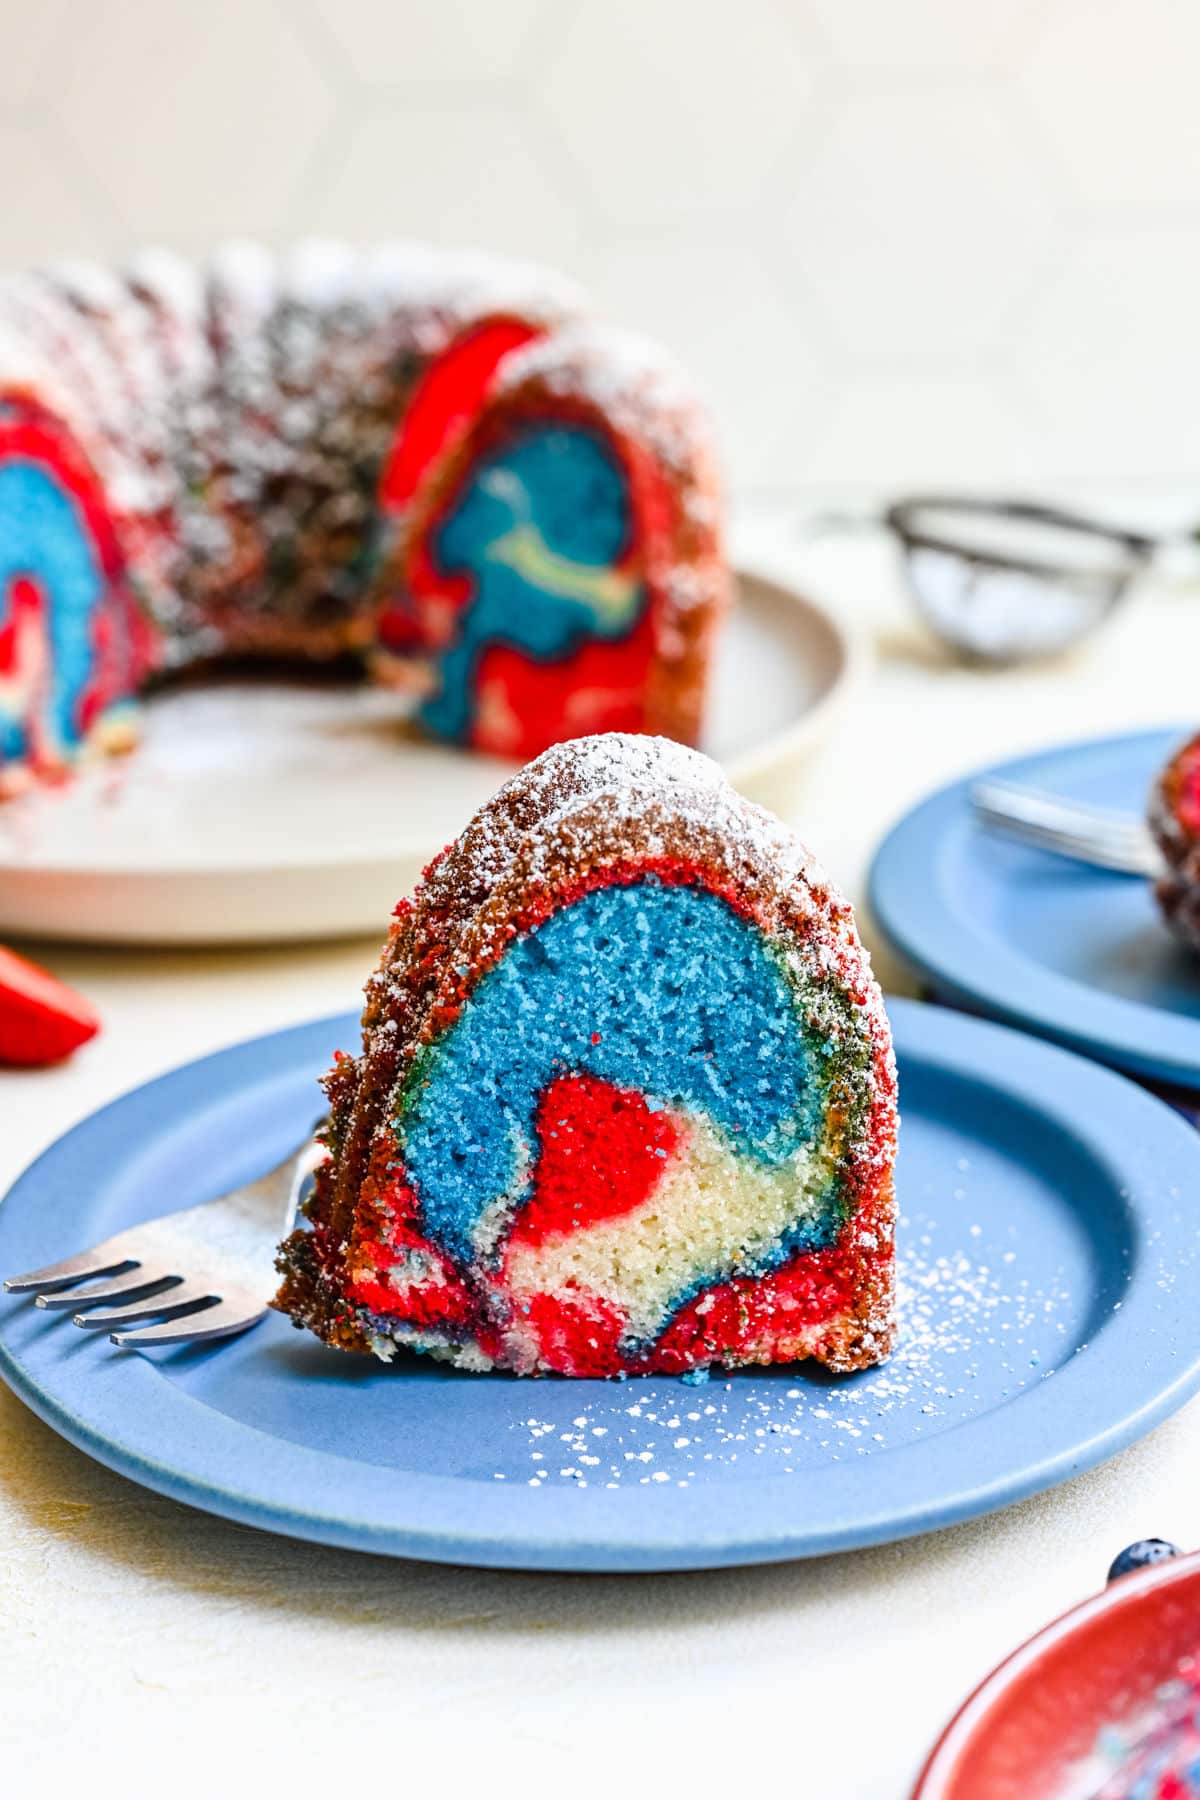 An upright slice of red white and blue bundt cake on a blue place.